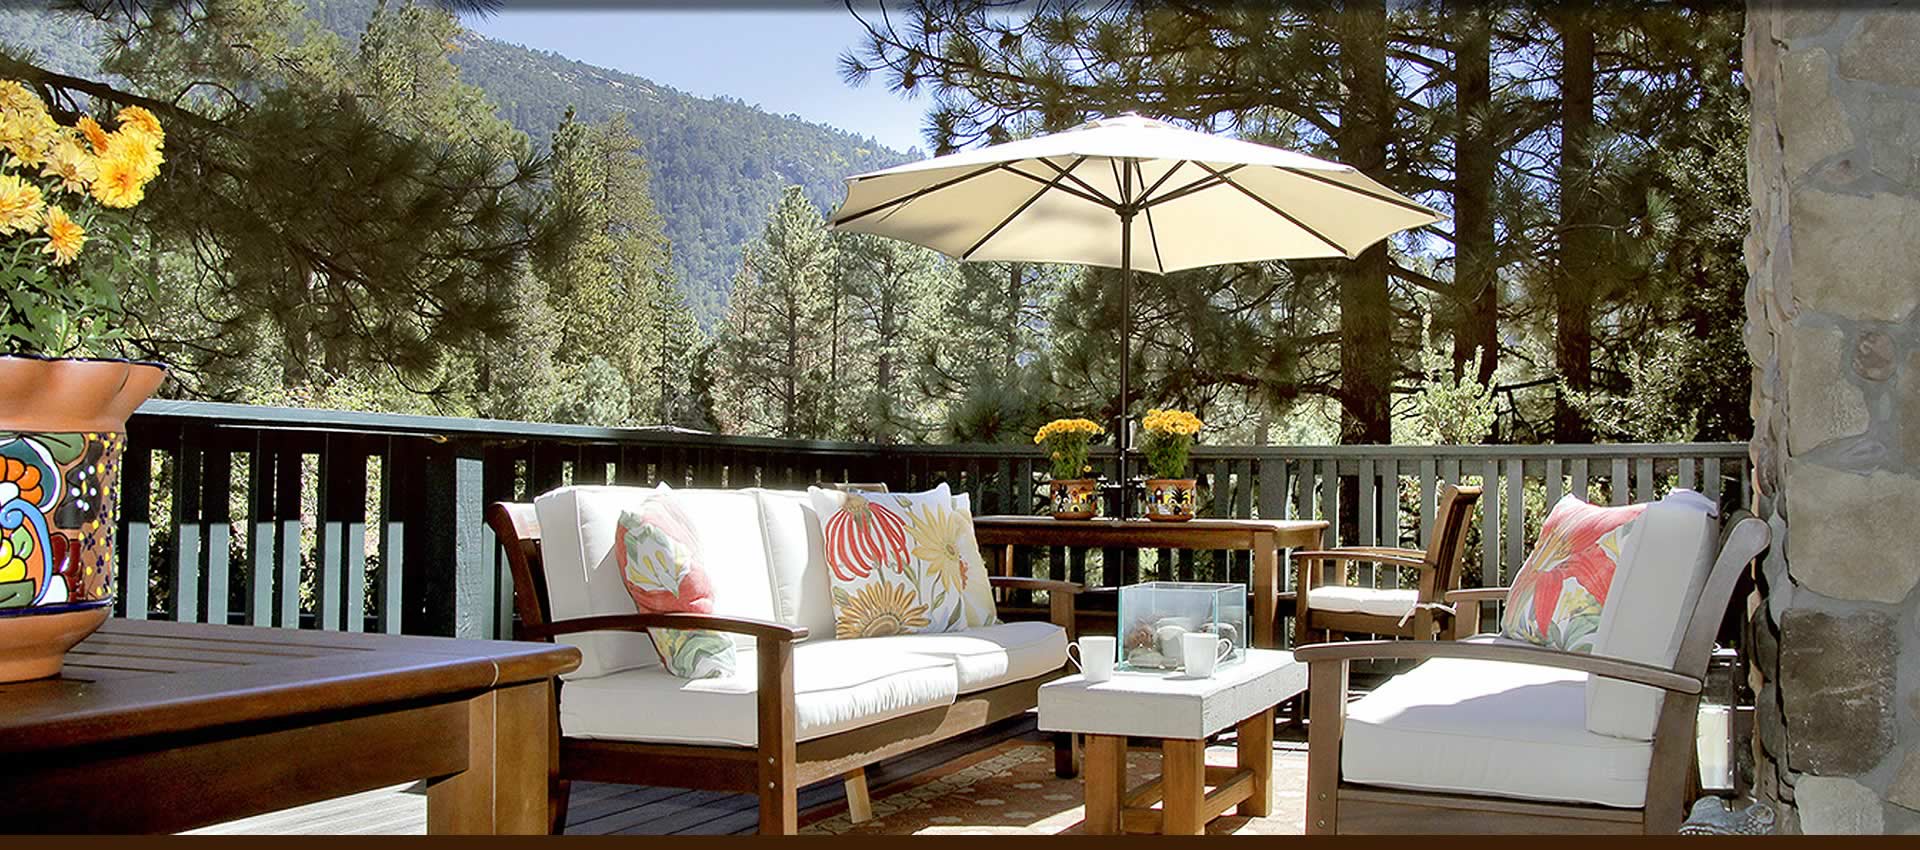 Grand Idyllwild deck sitting area with scenic mountain view